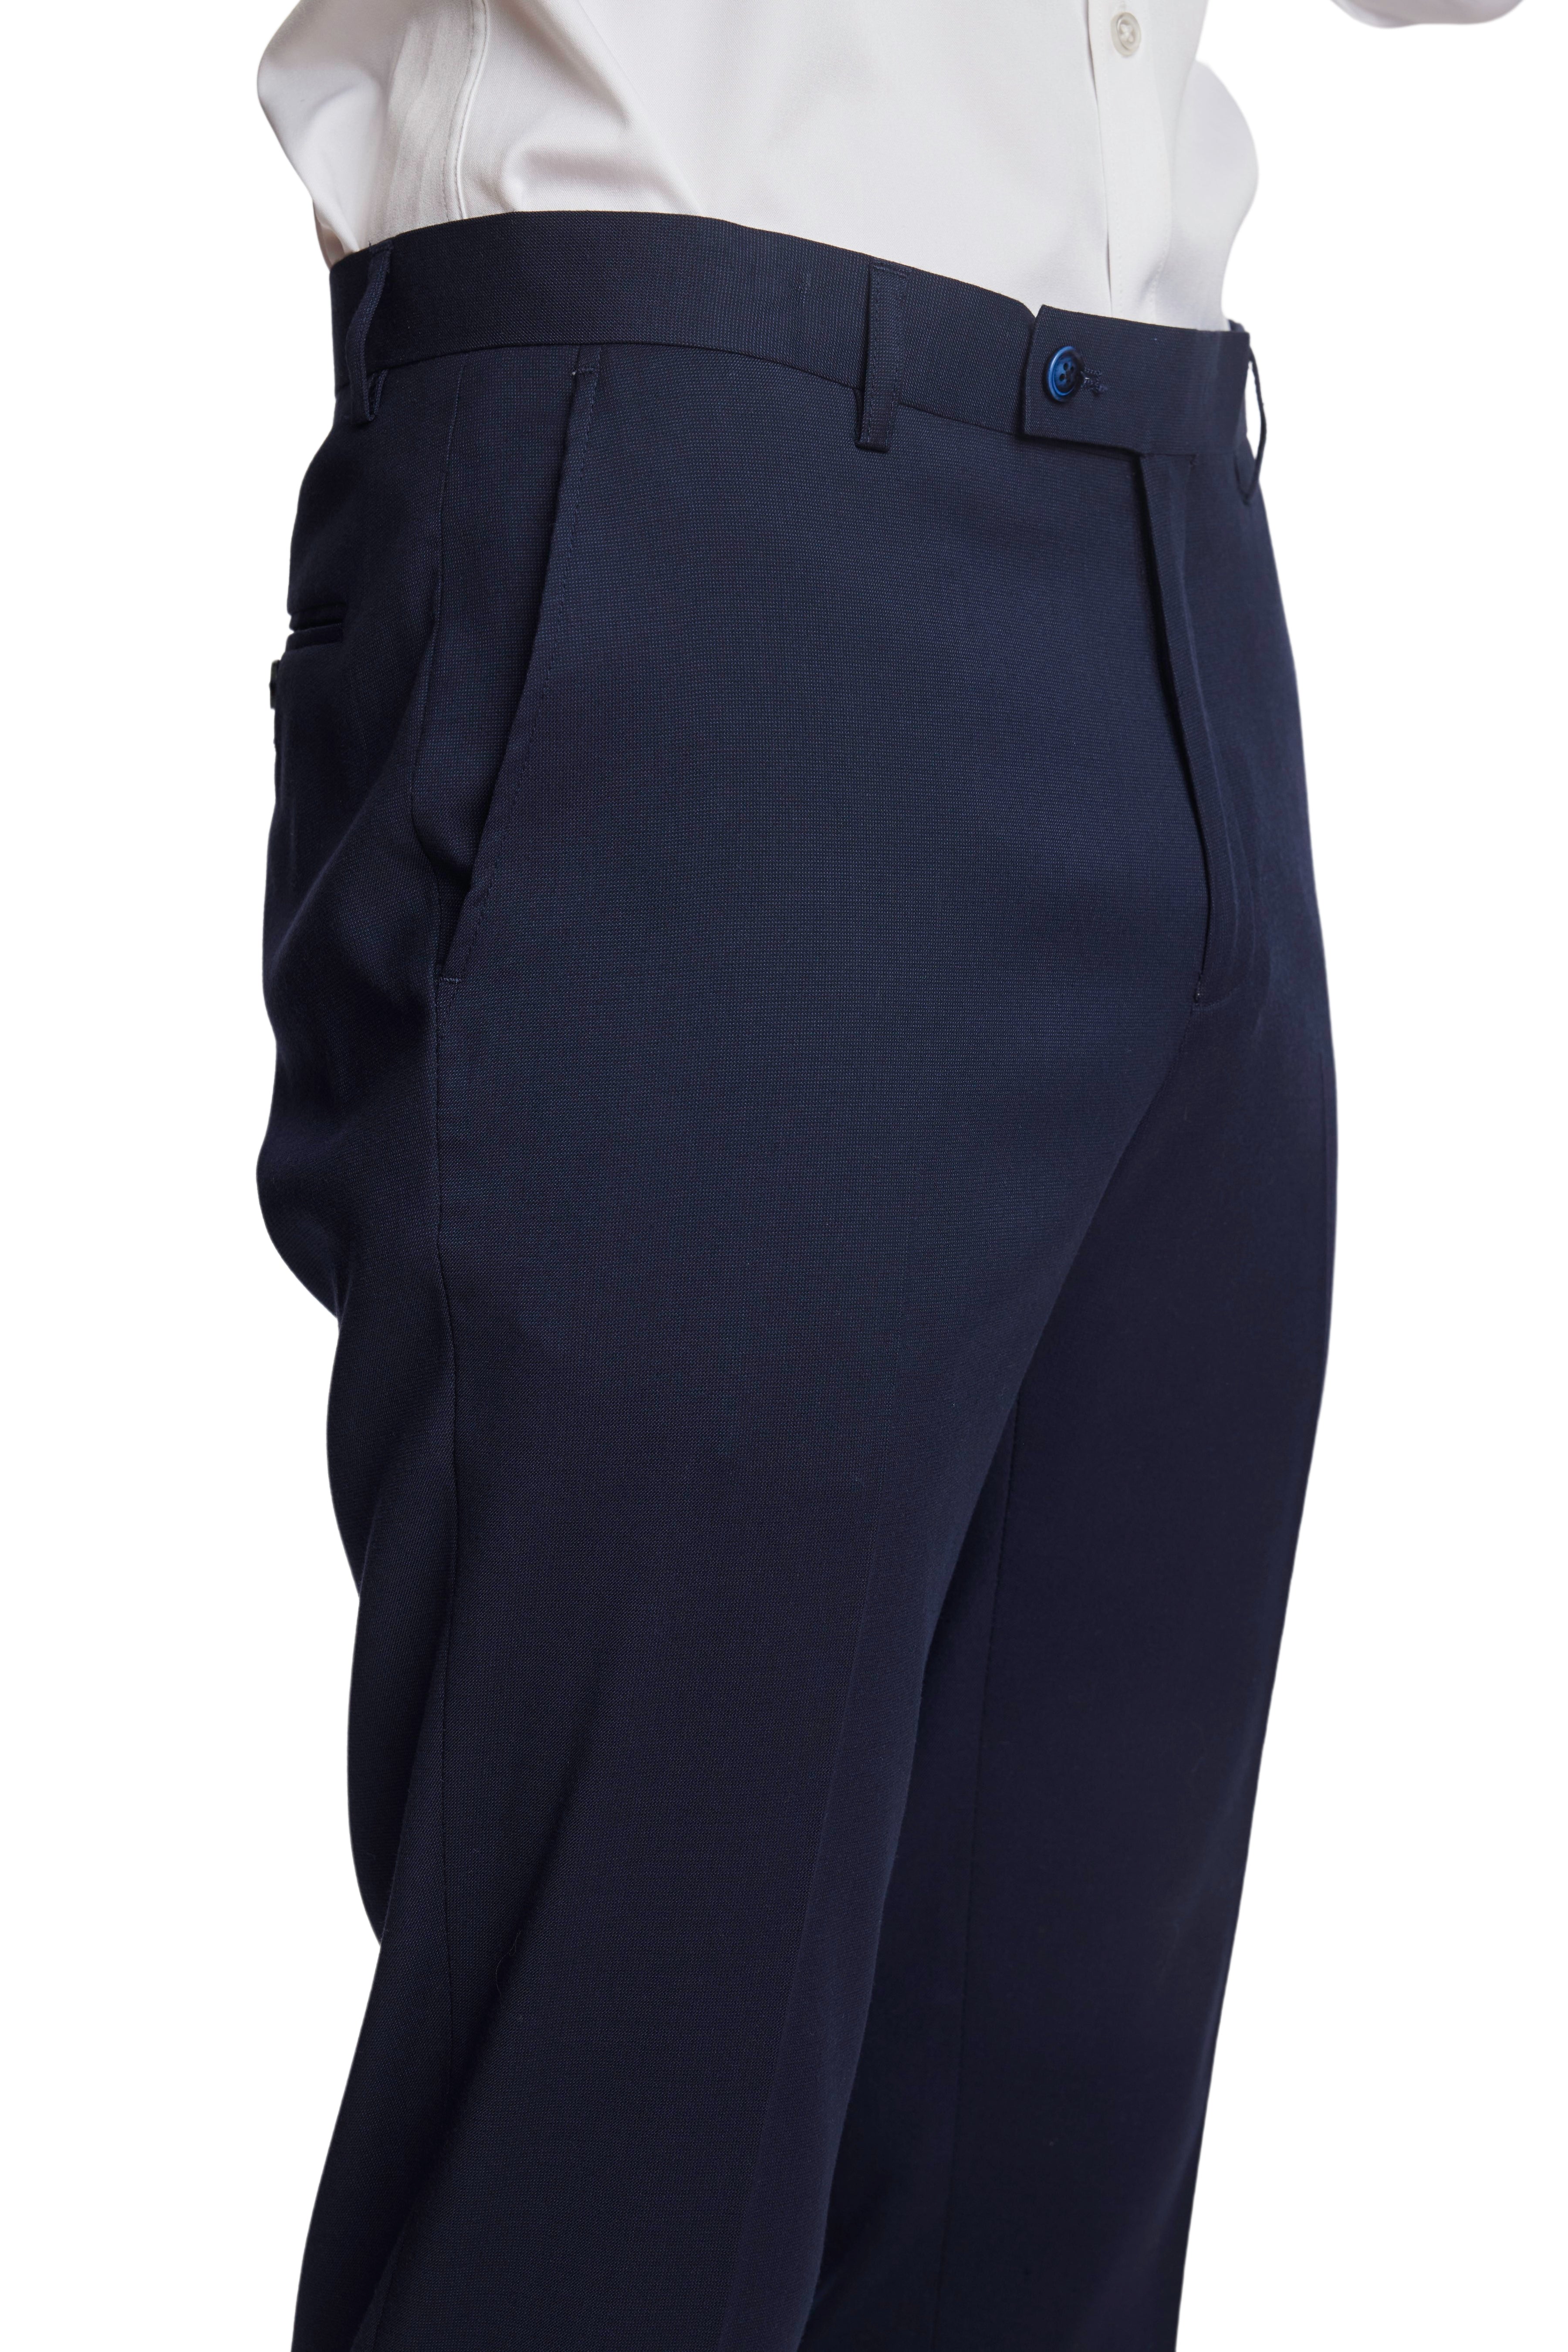 Modern Fit - Downing Pants - Naval Blue